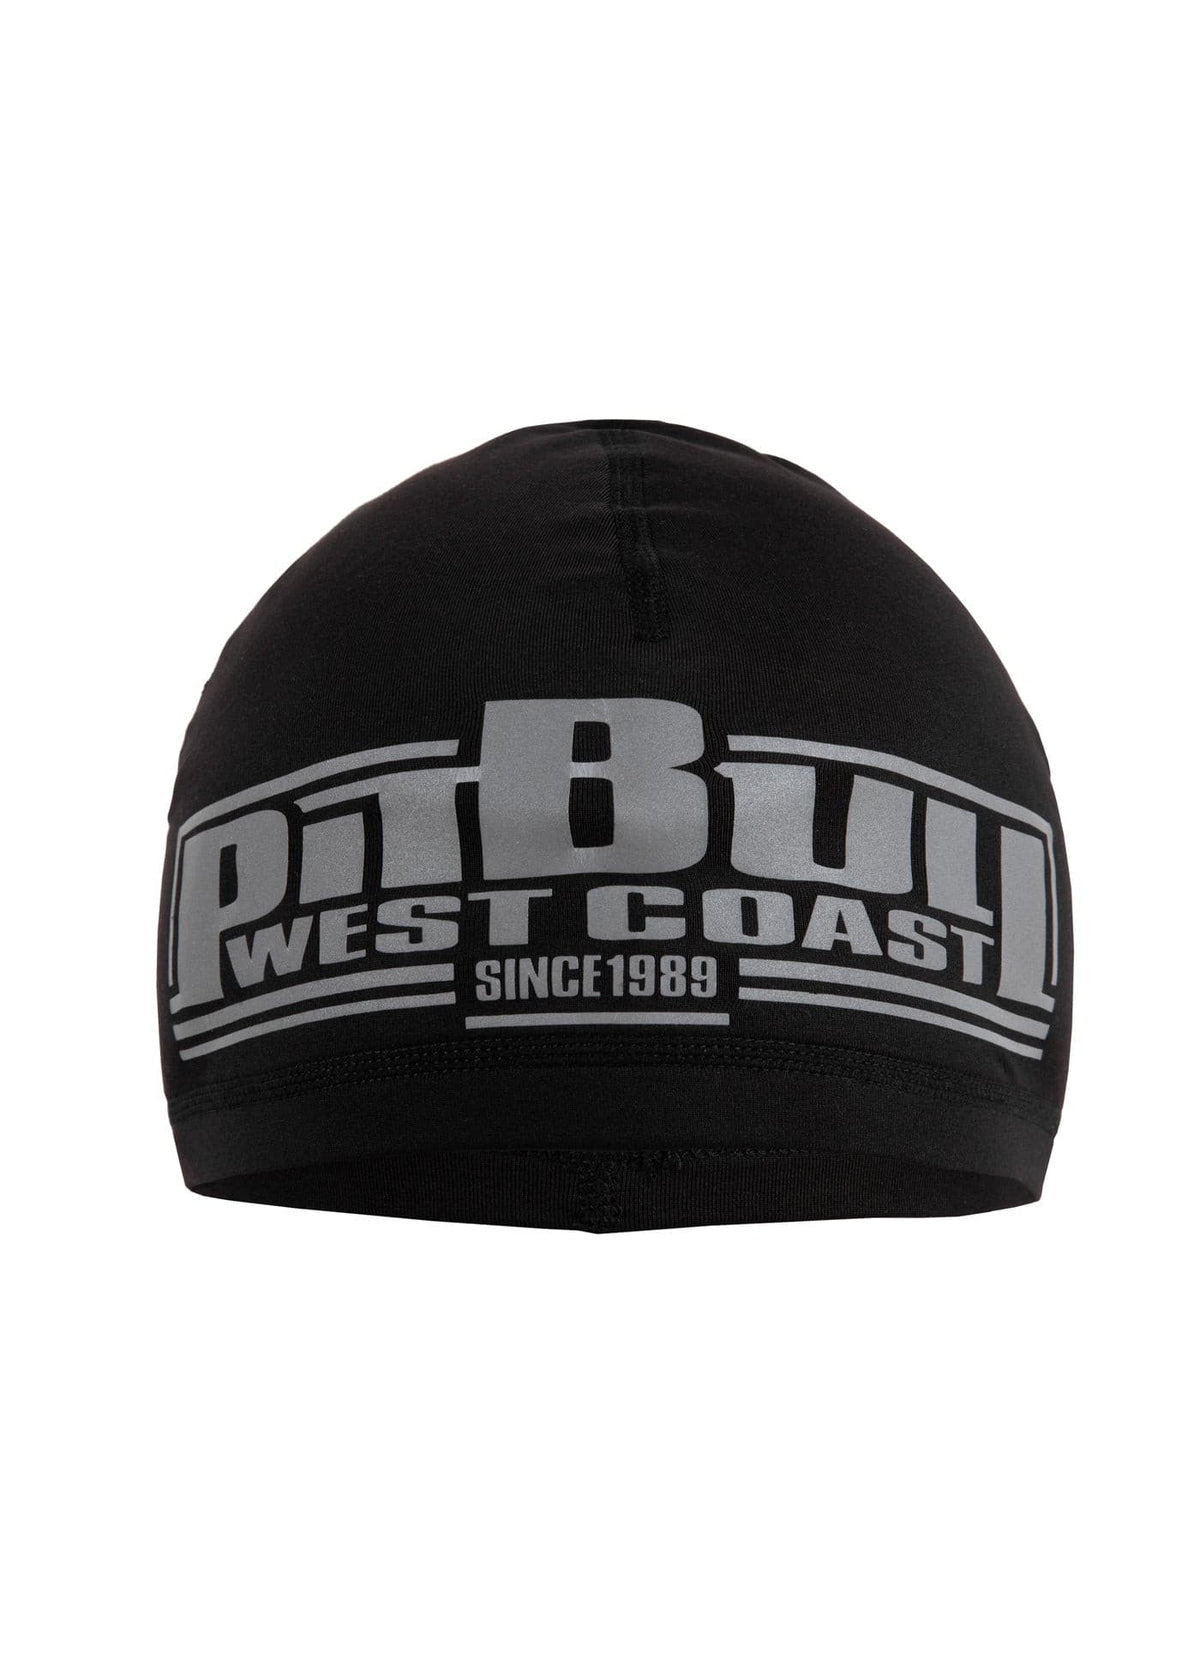 BOXING Special Sport Black Beanie.